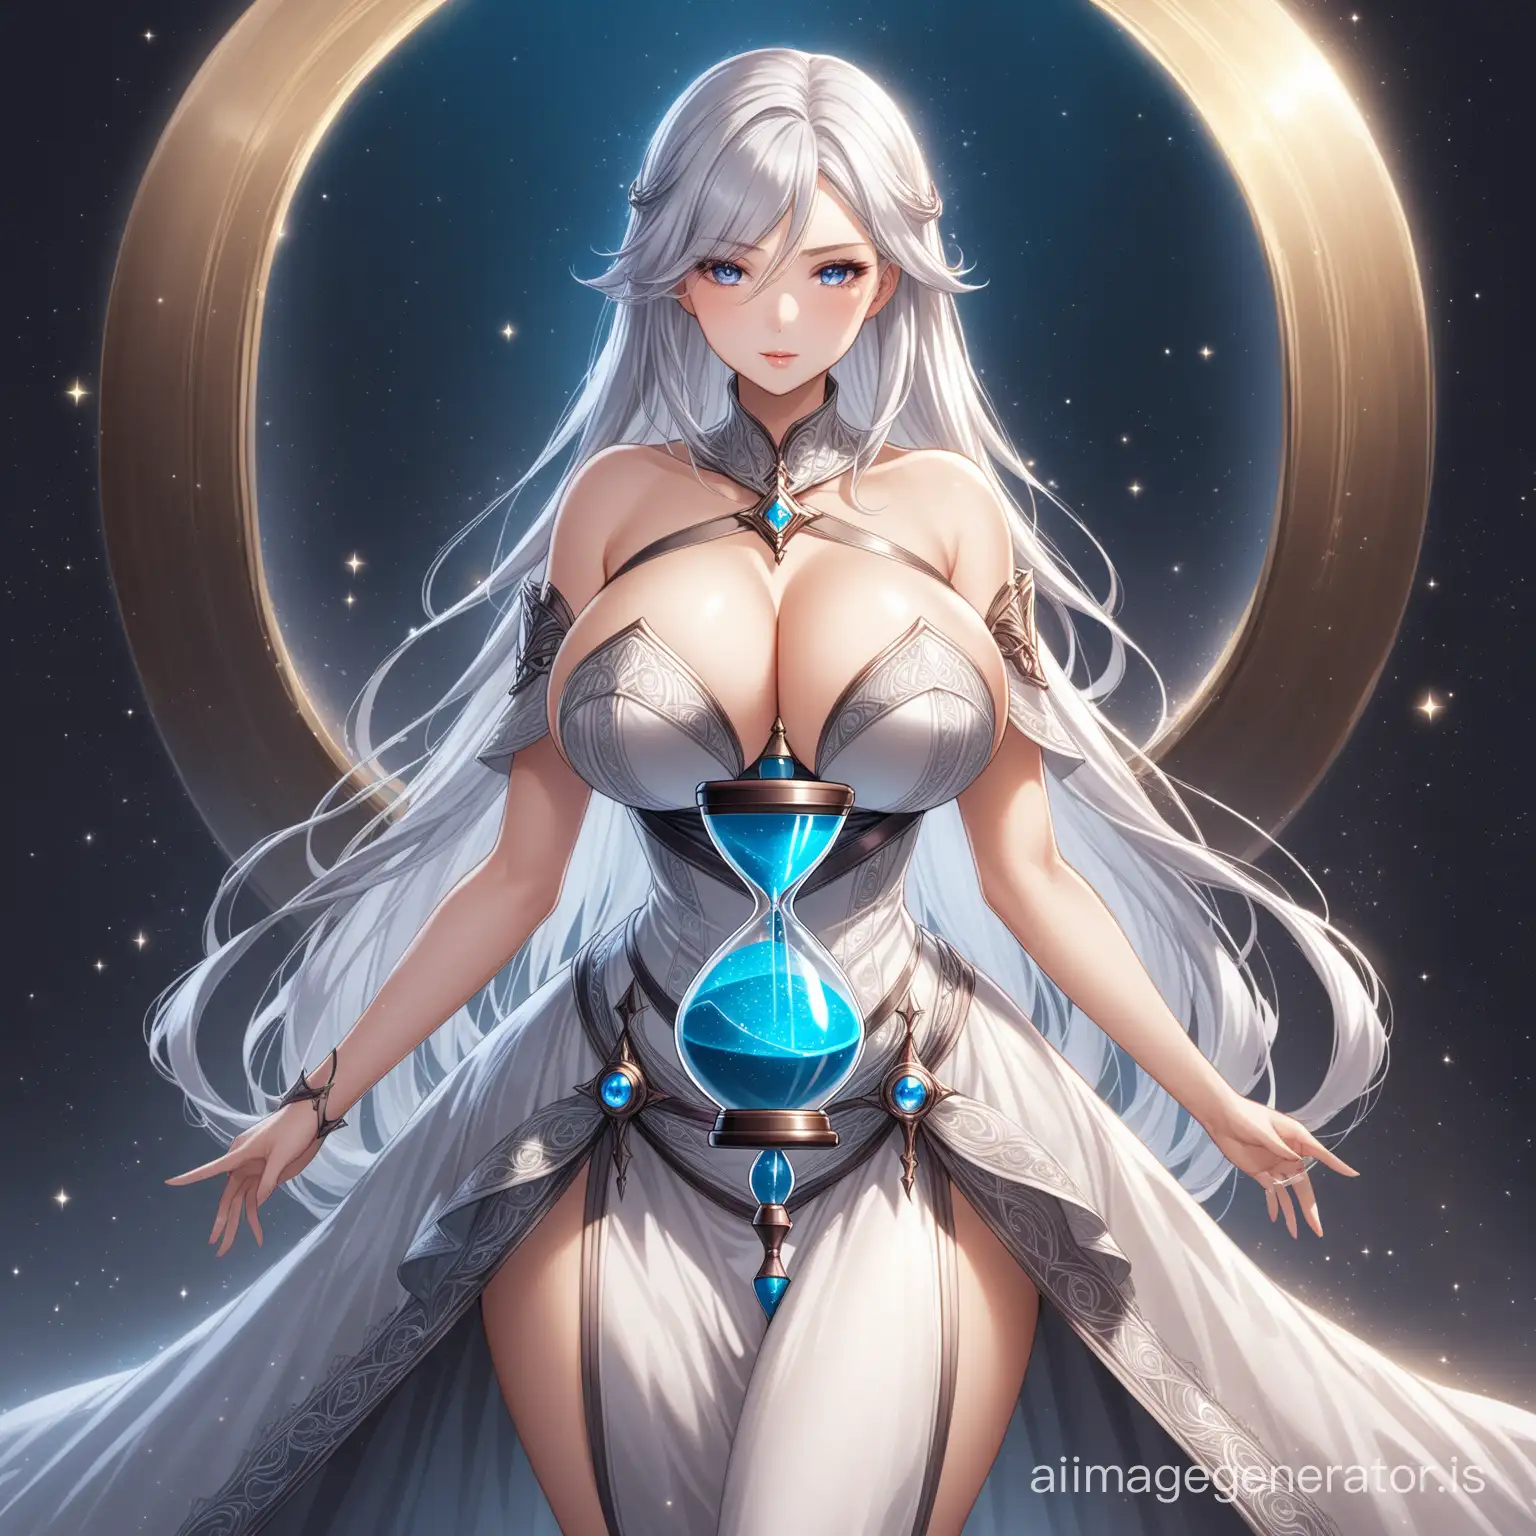 girl 
long completely light silver hair
angular face
hourglass figure
huge breasts
fantasy dress
